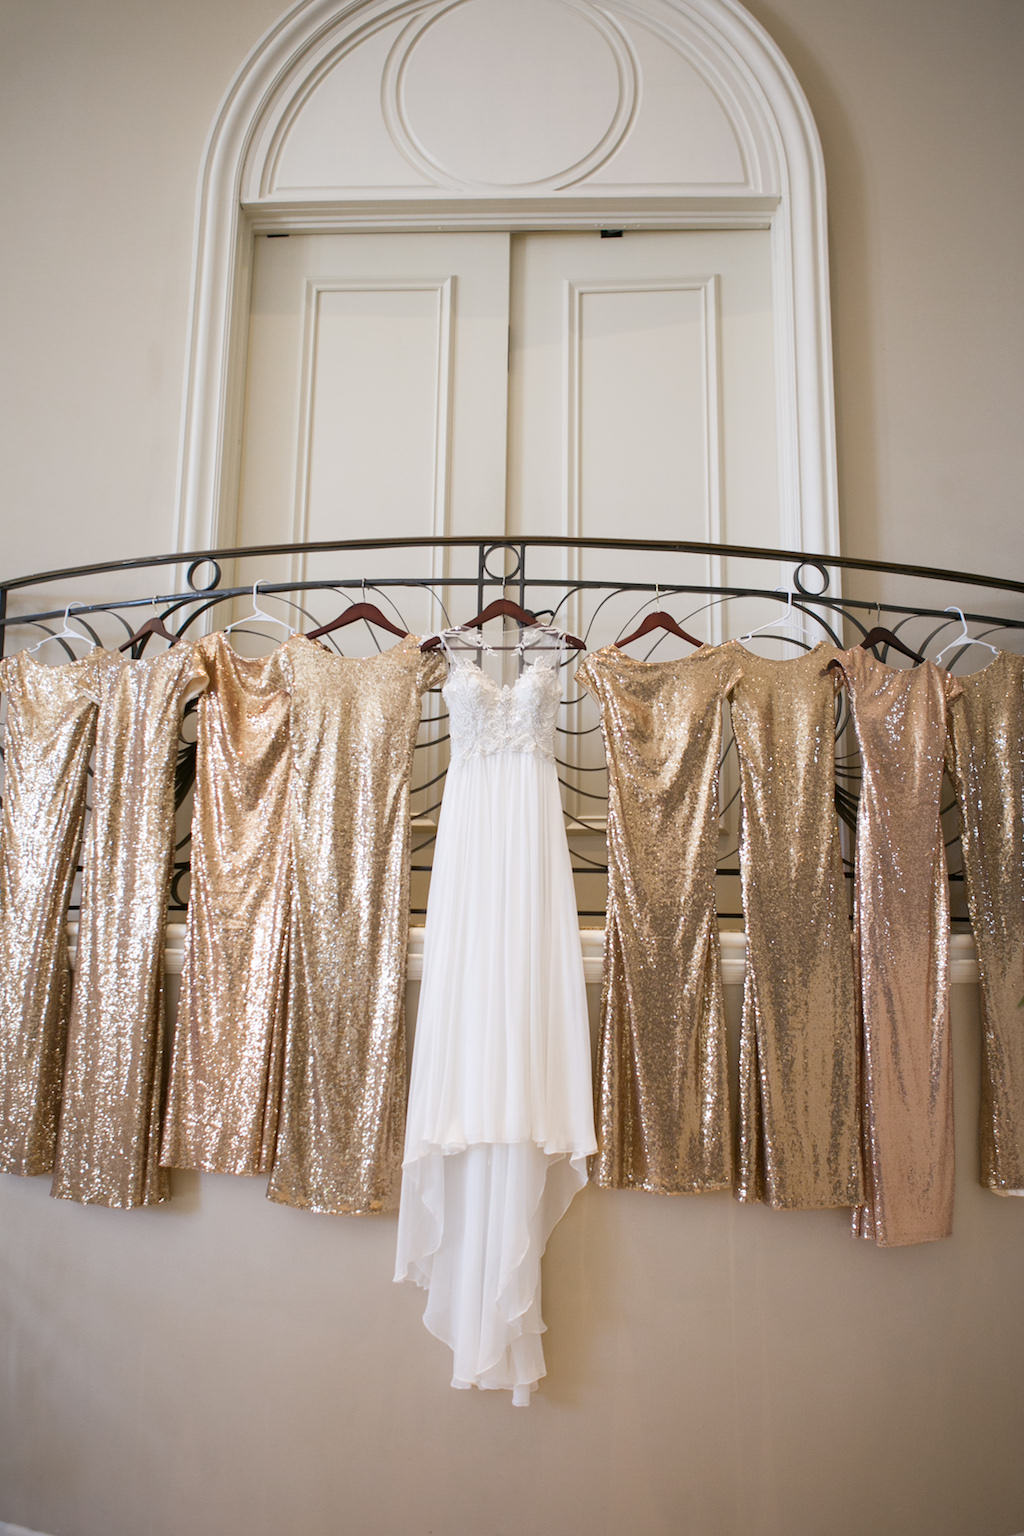 Maggie Sottero A-Line Illusion Wedding Dress with Lace Applique and Rhinestone Beaded Bodice, Gold Sequin Bridesmaid Dresses on Hangers | Sarasota Wedding Photographer Carrie Wildes Photography